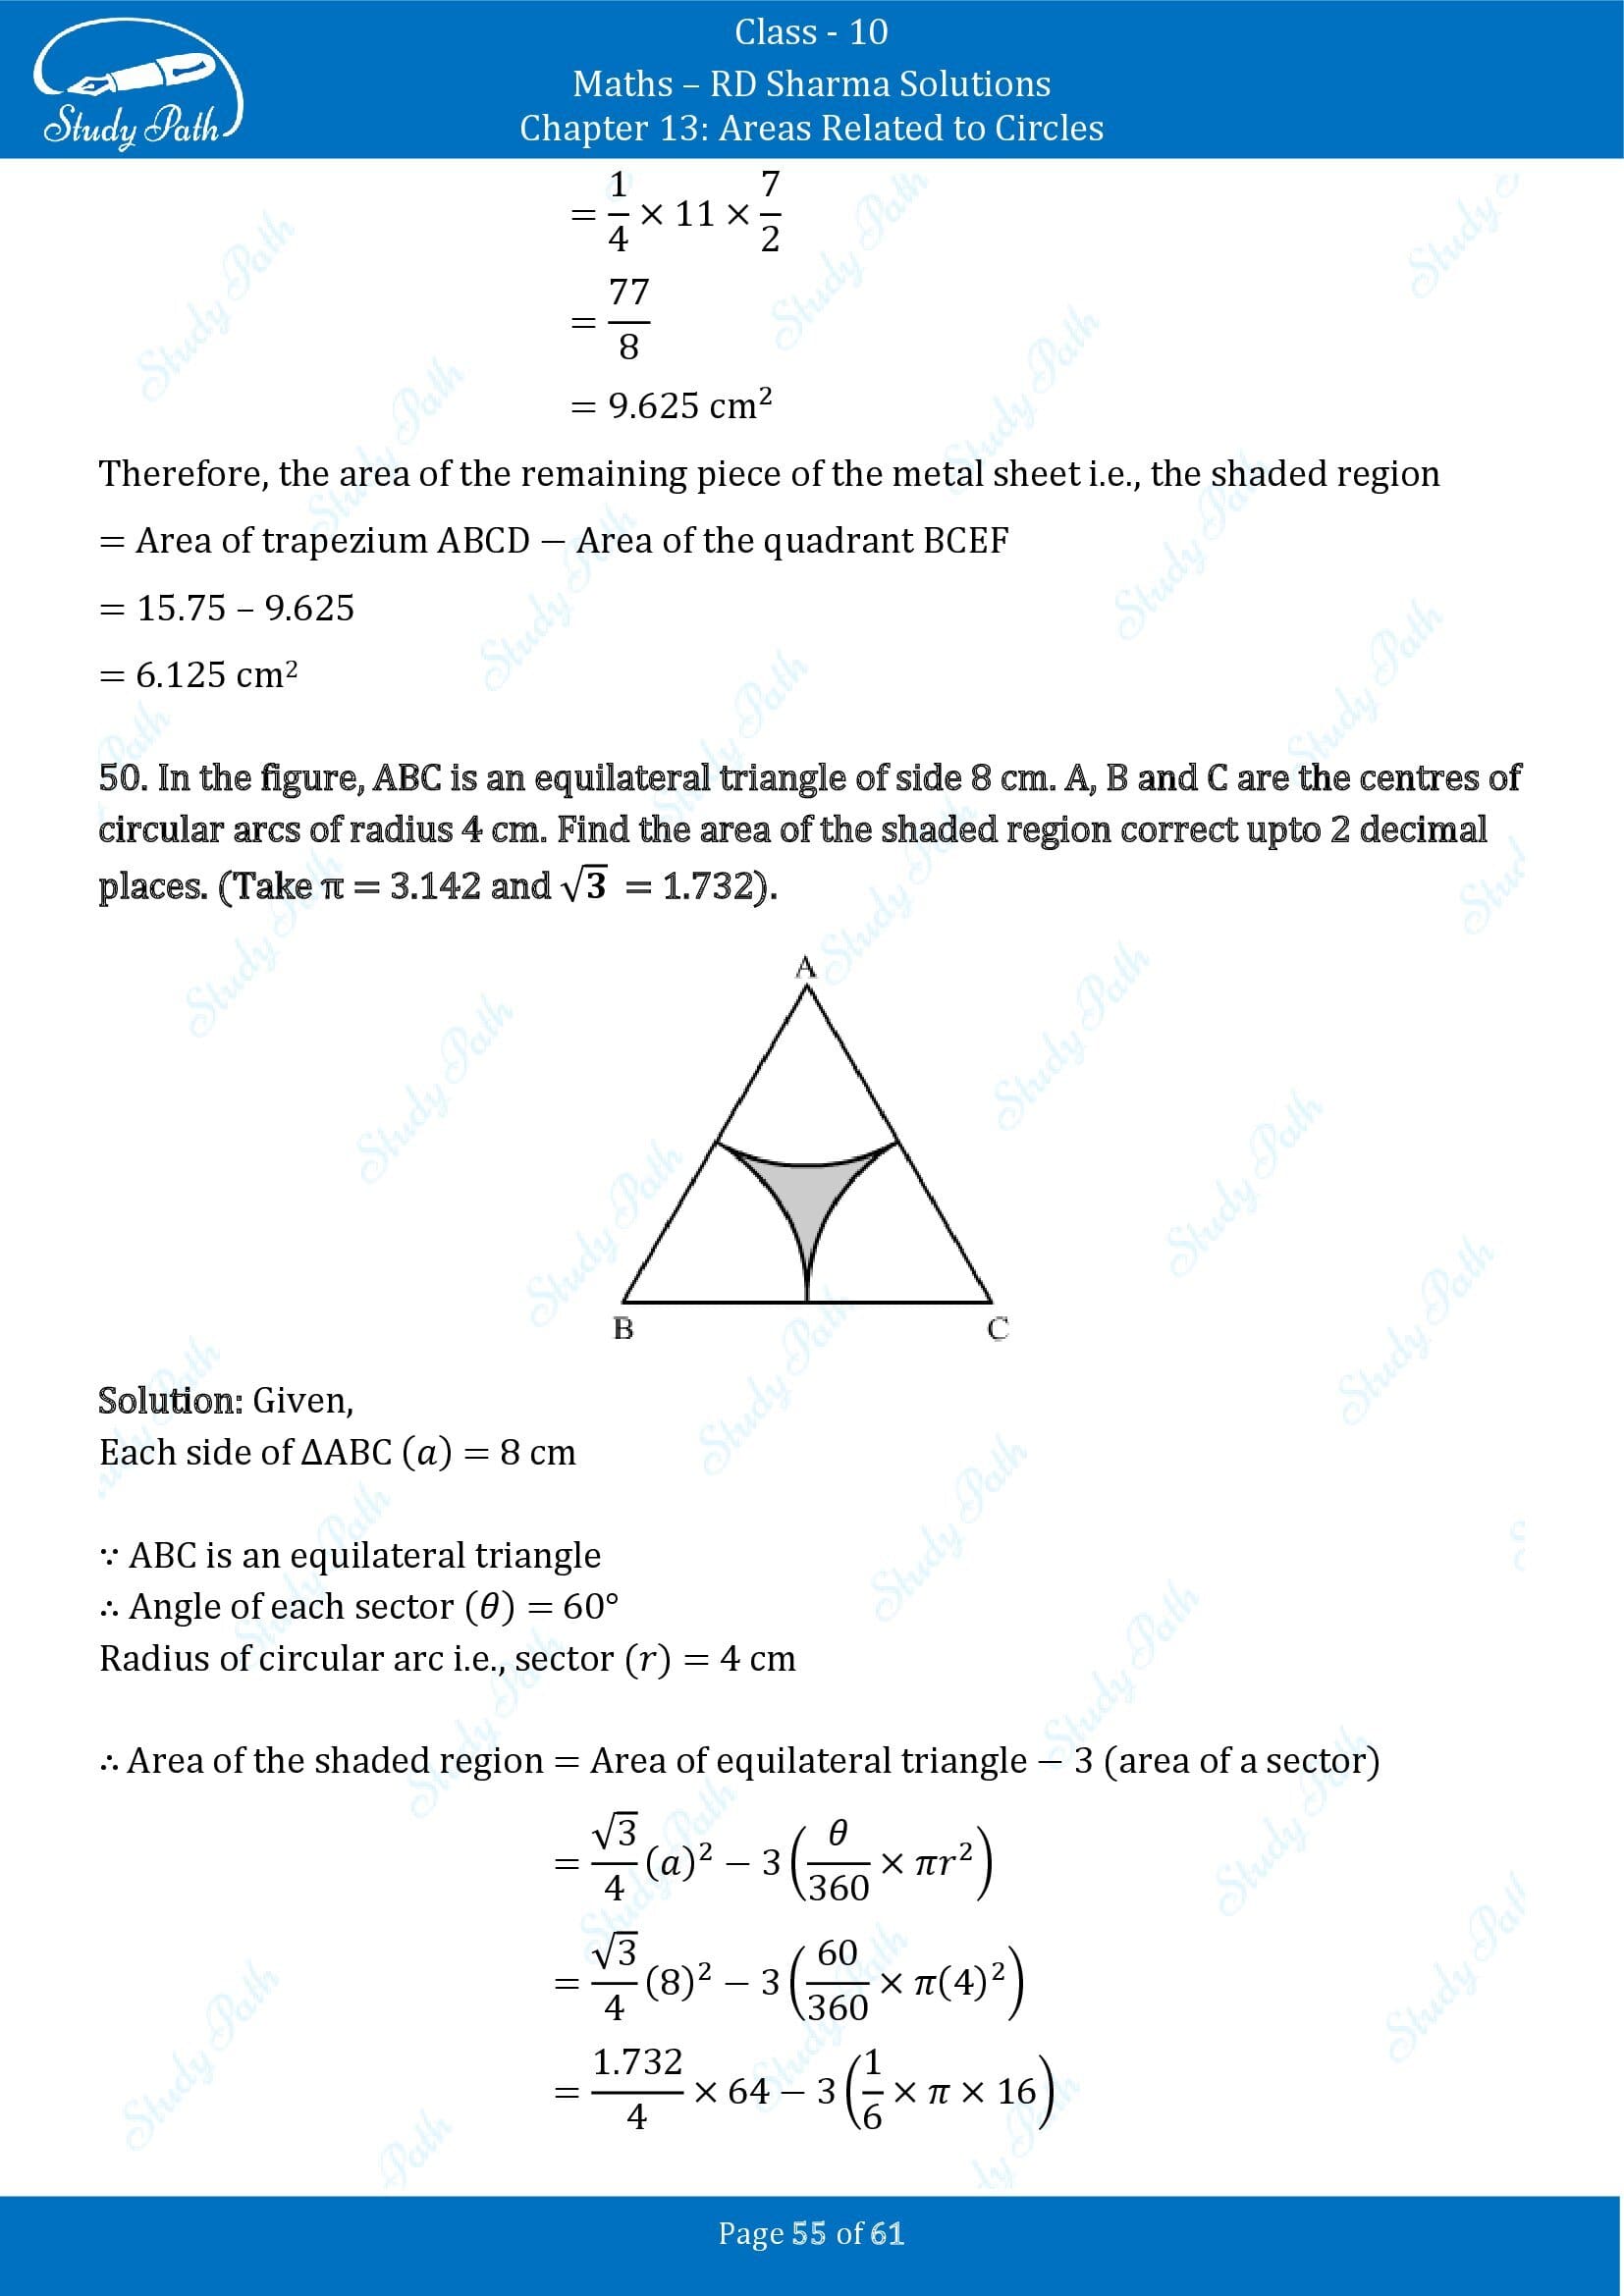 RD Sharma Solutions Class 10 Chapter 13 Areas Related to Circles Exercise 13.4 00055